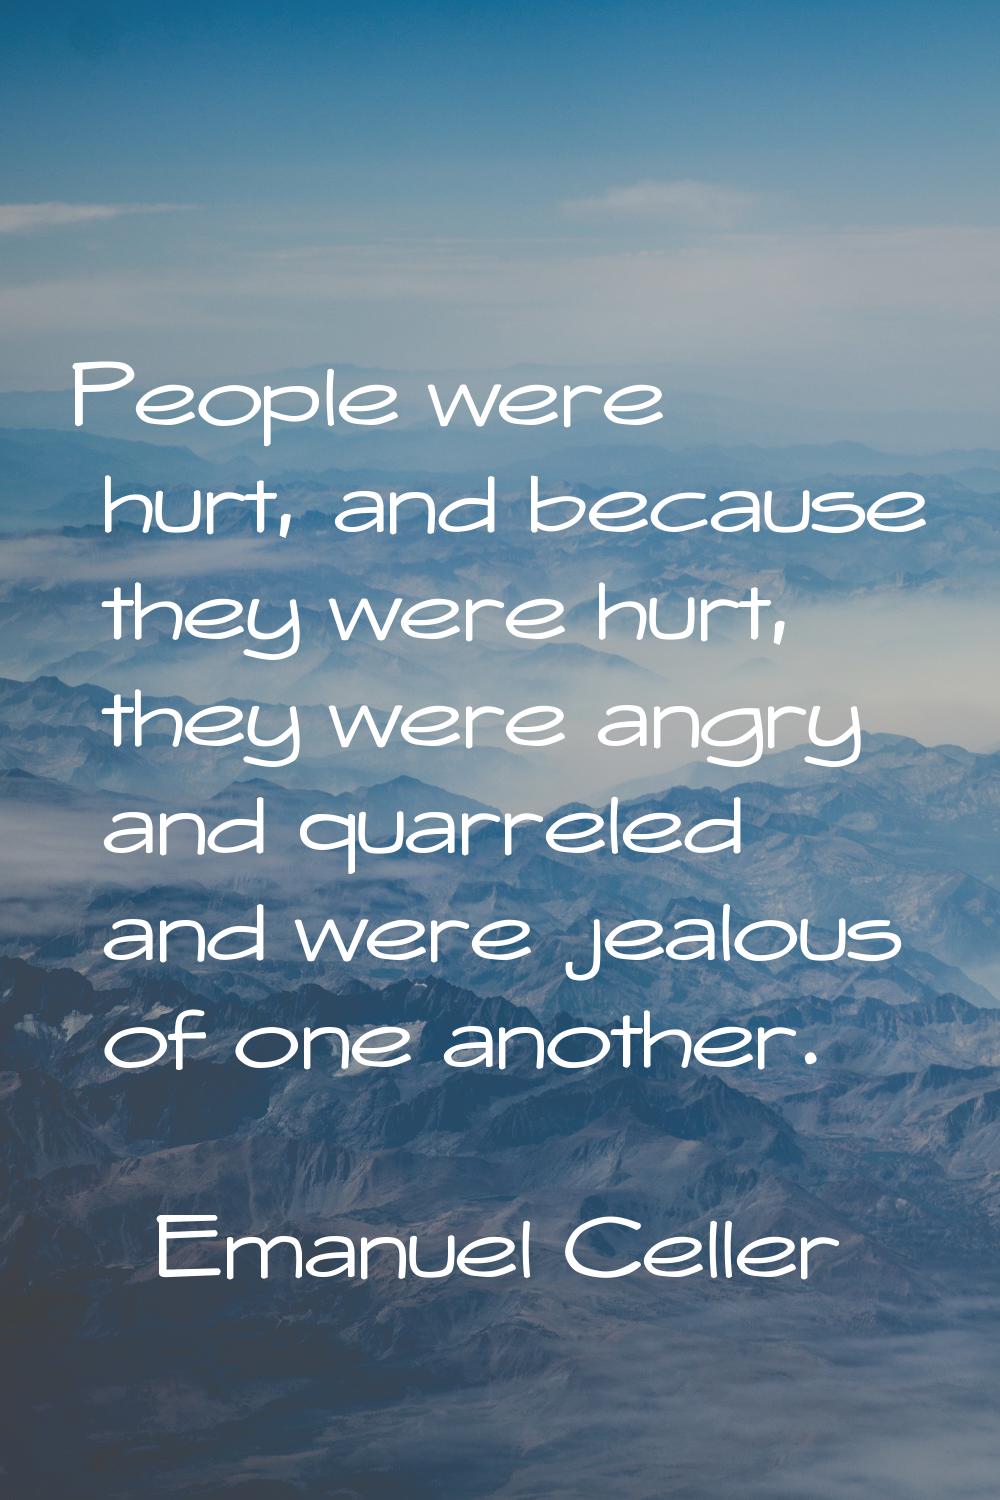 People were hurt, and because they were hurt, they were angry and quarreled and were jealous of one